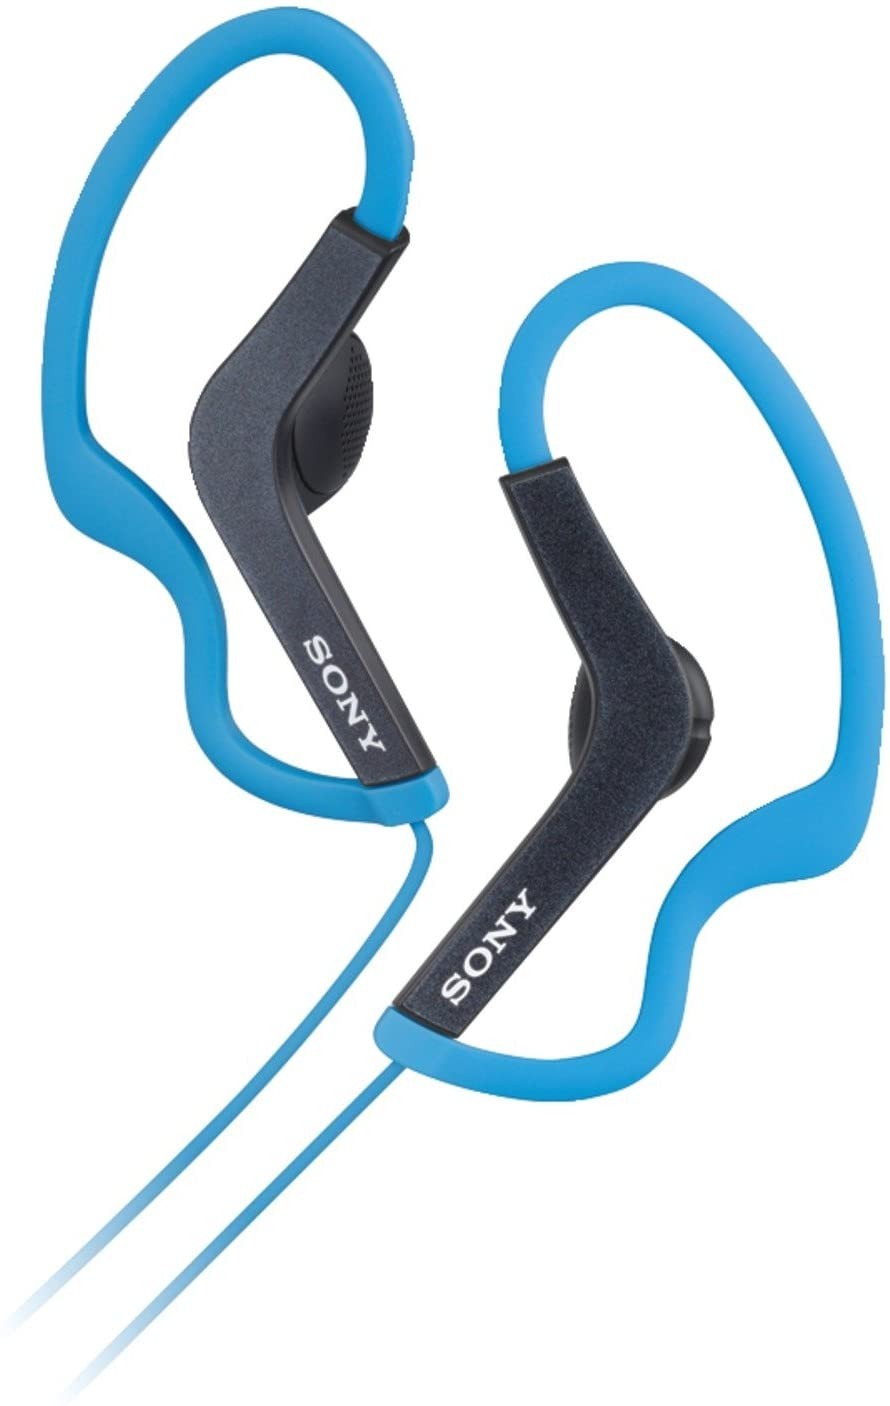 Sony MDR-AS200/BLU Active Sports Headphones, Blue [Blue]